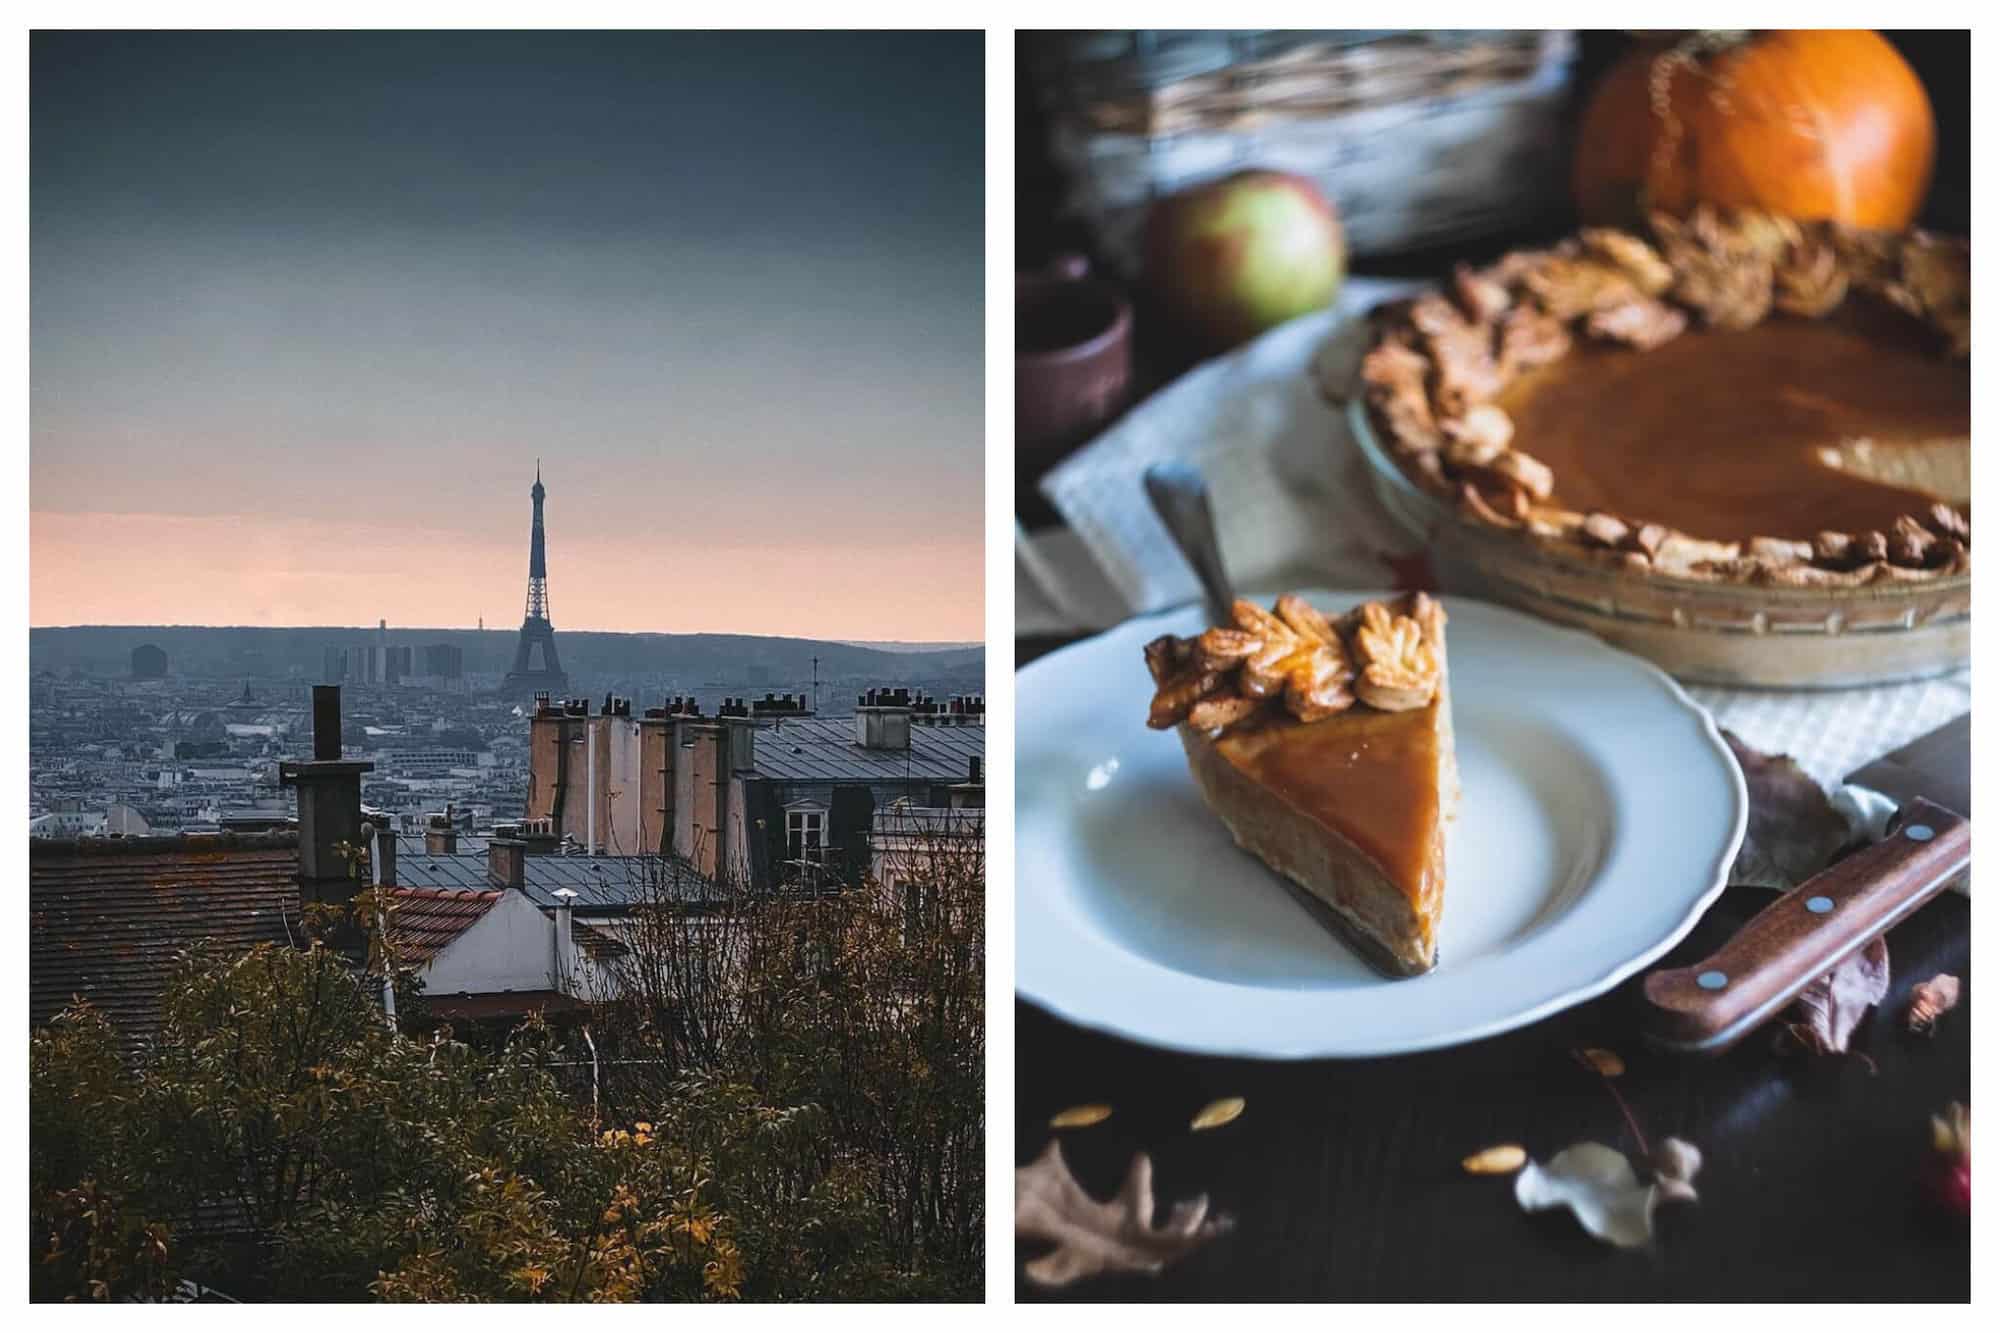 Left: a view of the Paris skyline. The sun is setting and the Eiffel Tower is visible. There are also several Parisian rooftops as well as trees with barely any leaves. Right: A slice of pumpkin pie on a white plate. The rest of the pie is visible in the background. The crust is made of dough in the shape of leaves, and there are fall decorations on the table.